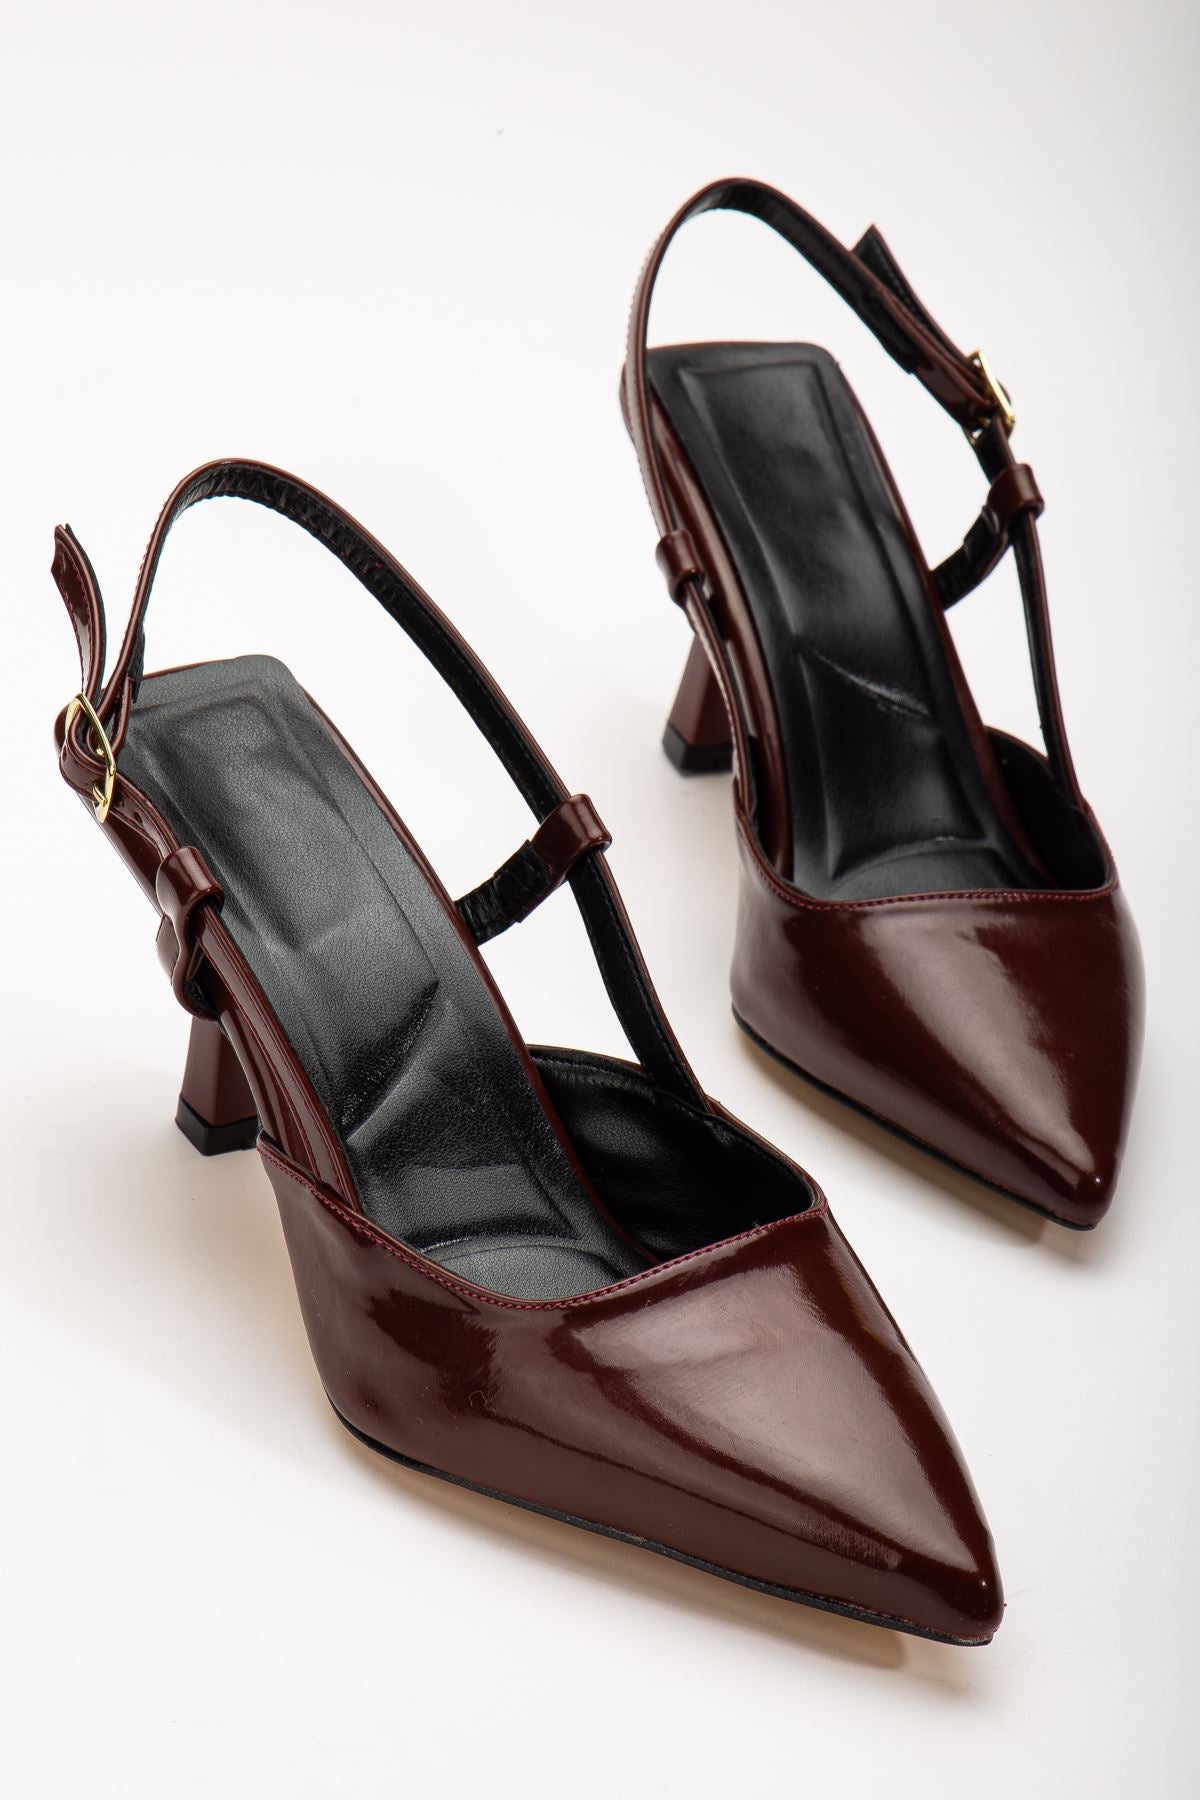 Women's Burgundy Patent Leather Thin Heeled Shoes - STREETMODE™